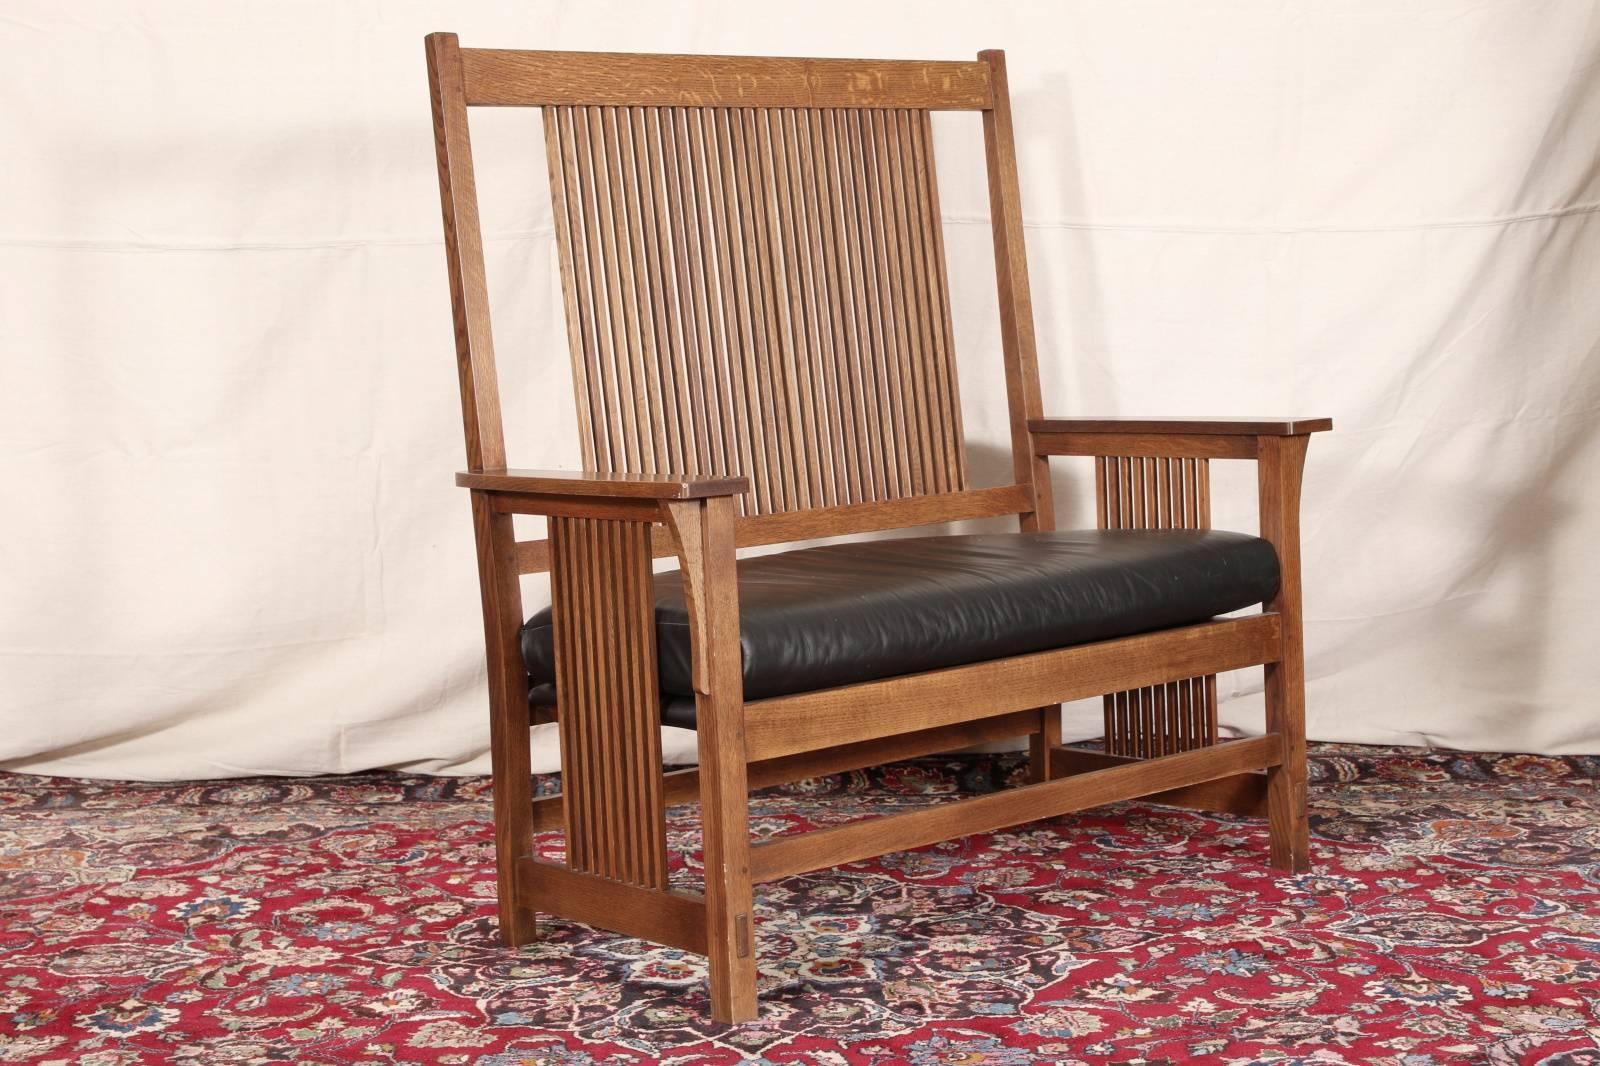 Stickley tall back settee with leather seat, slated back and sides, oak construction.

Condition: Expected wear and signs of use including stains to seat, but still presents very well.